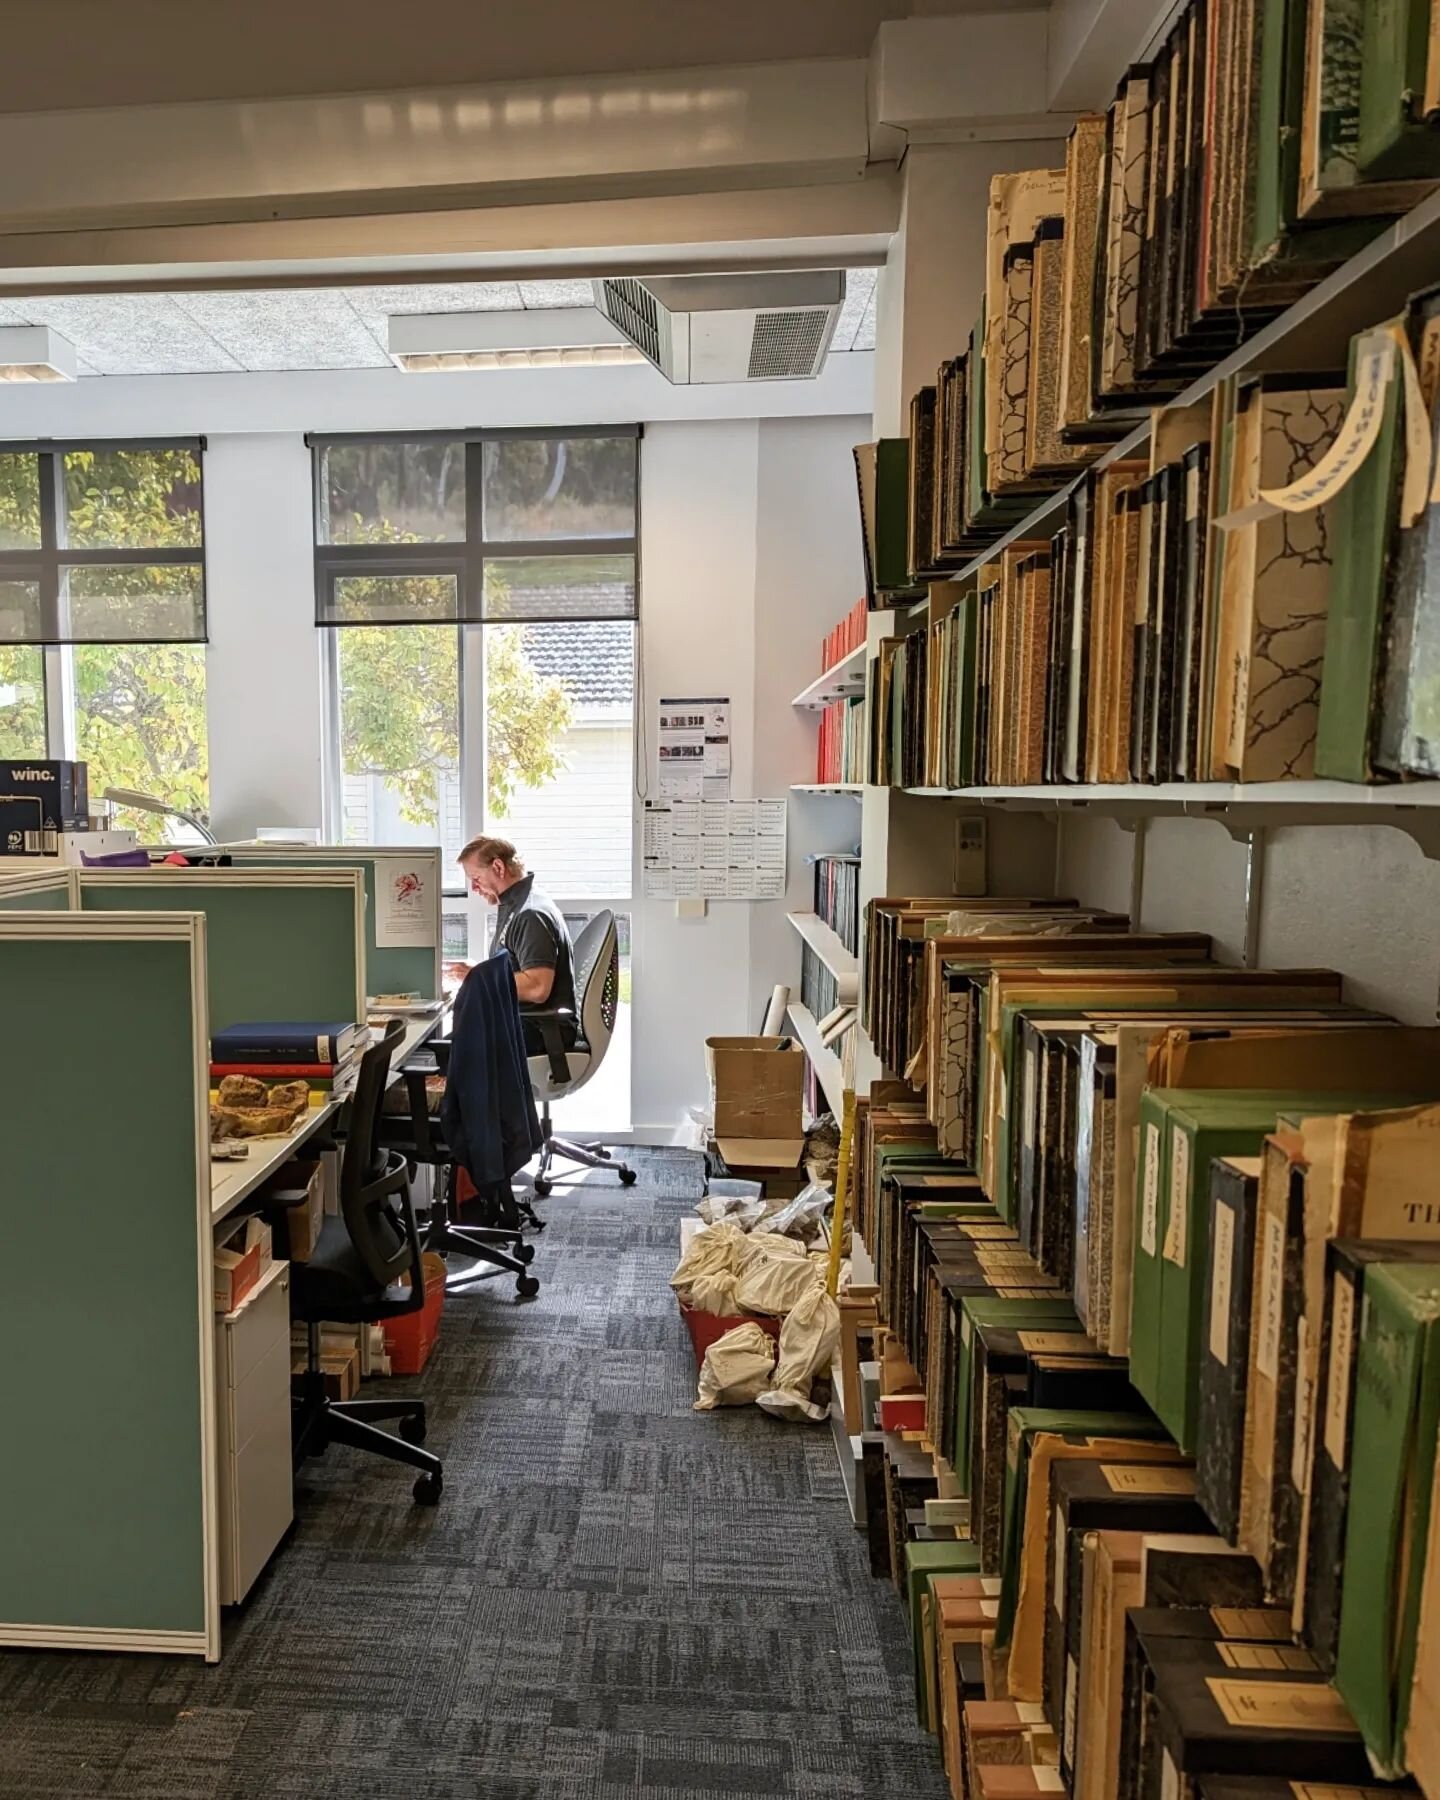 LLUNE PhD student Damien Wilkinson in the zone. You get to a stage in the project where you're fighting for more desk (and floor) space for all those precious samples!
---
We have lots of exciting student projects available, don't hesitate to get in 